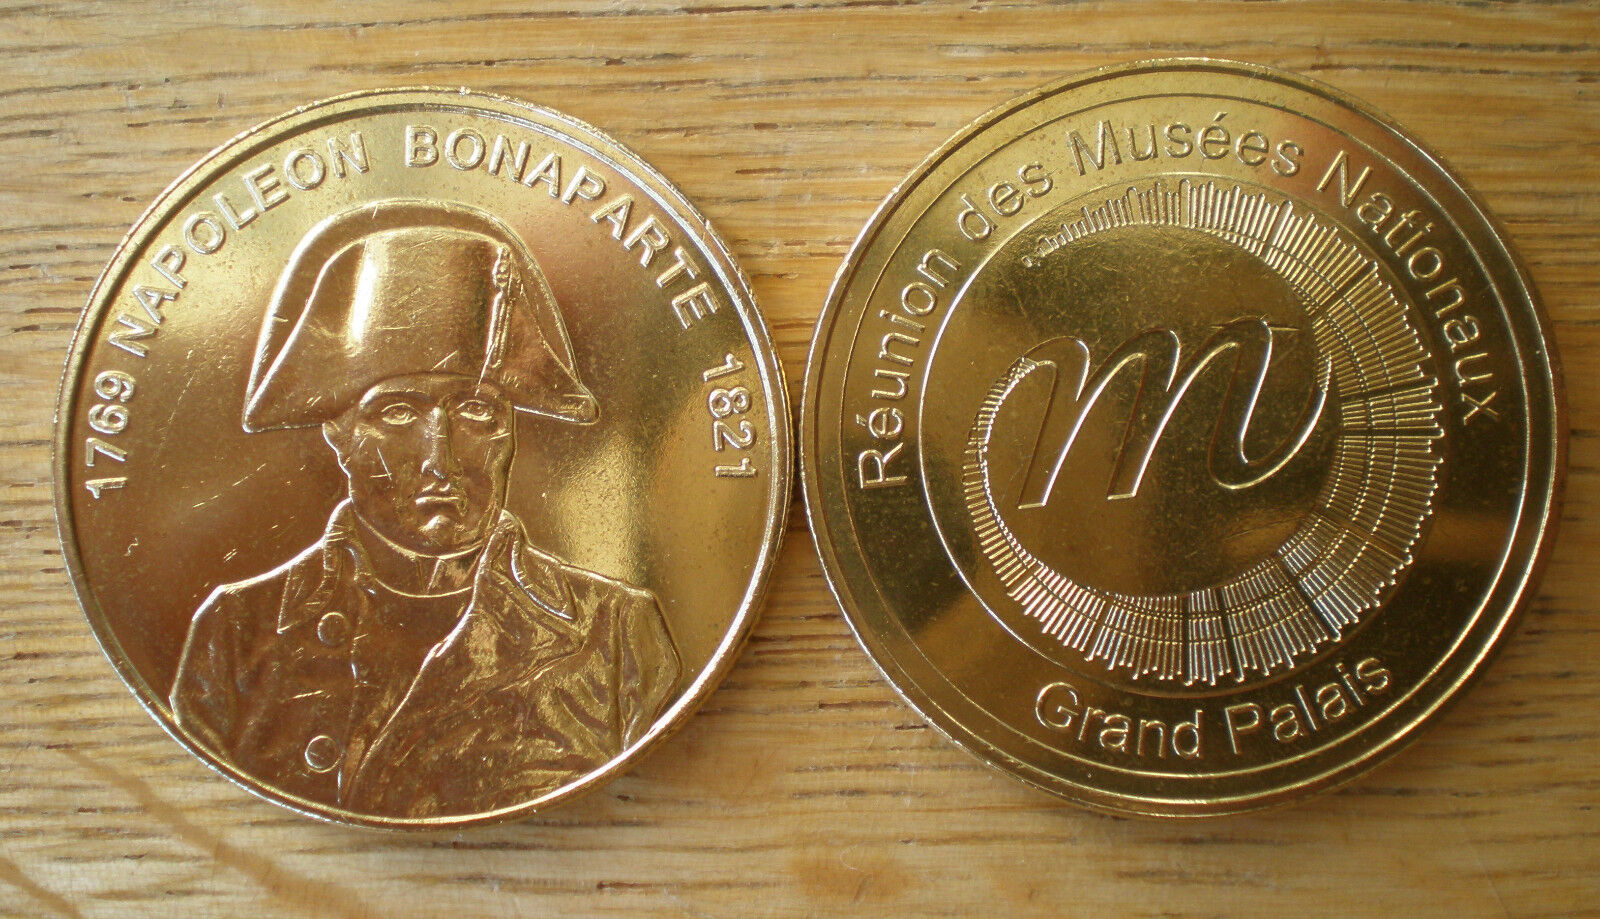 Napoleon Bonaparte Gold Plated by National Museum Invalides Paris France Medal